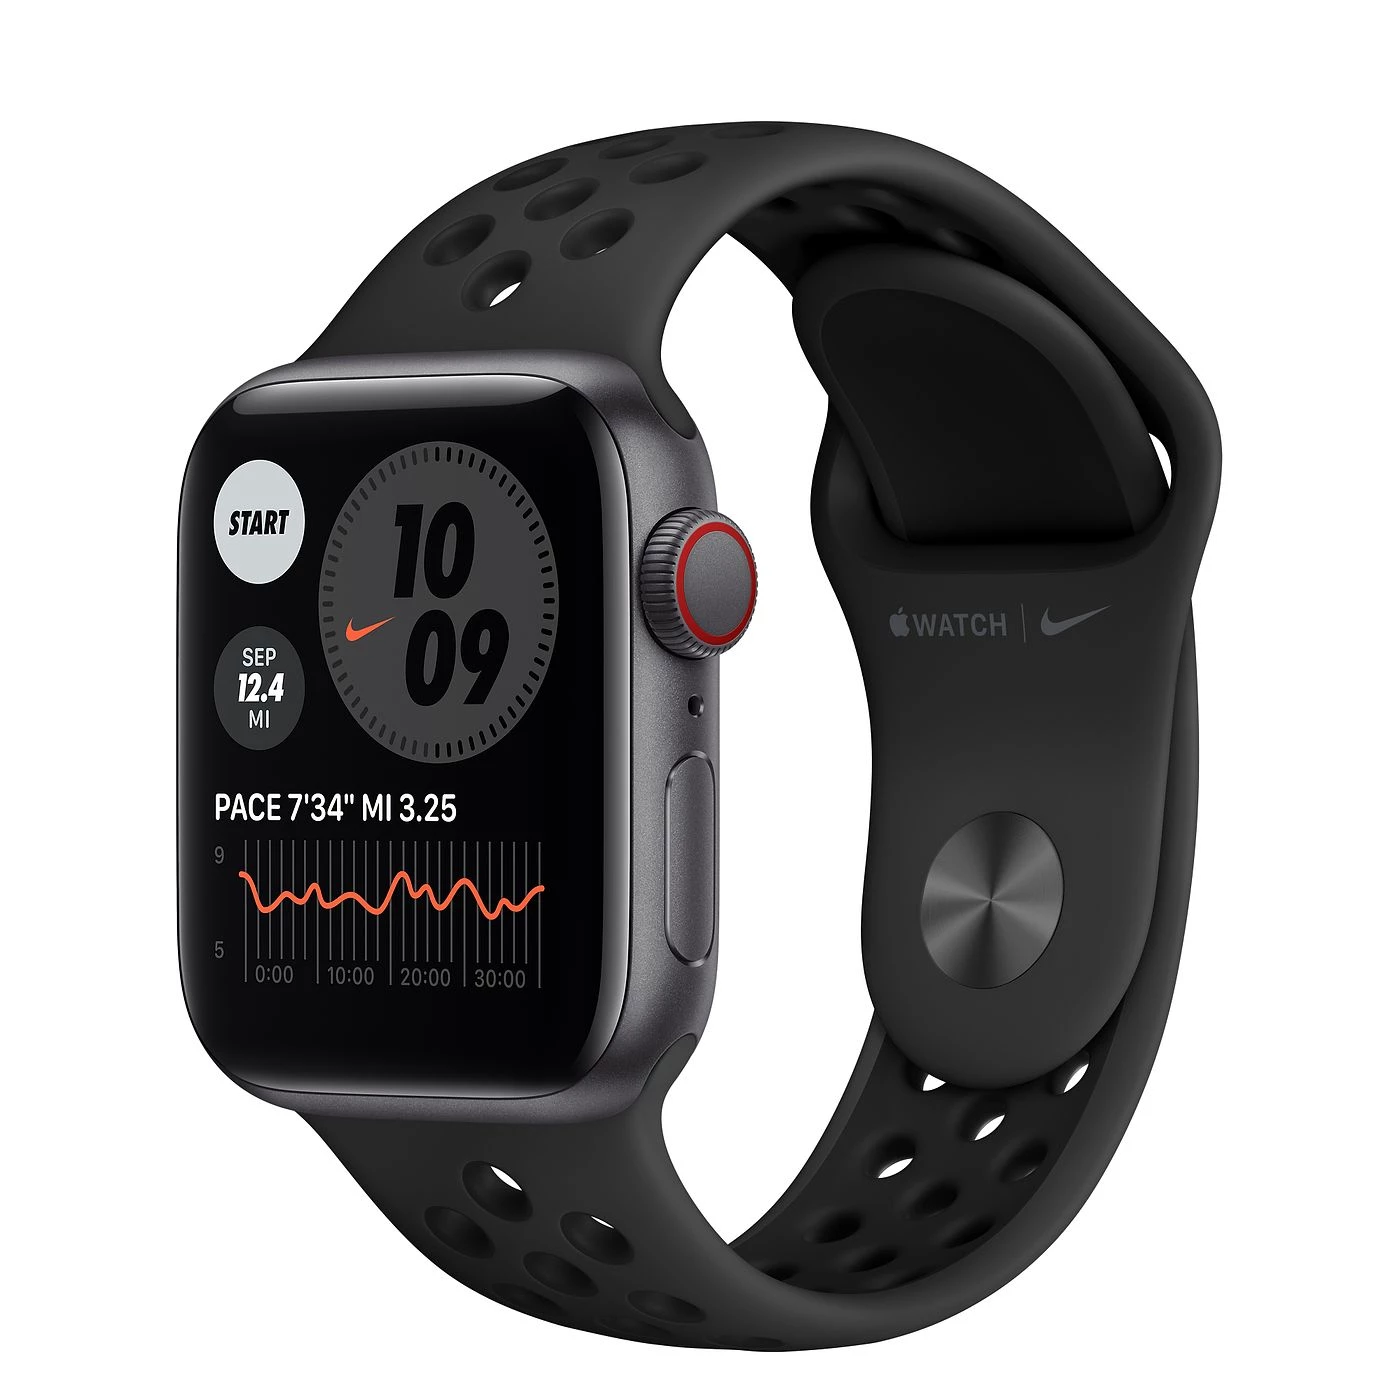 Apple Watch SE Nike GPS + Cellular 40mm Space Gray Aluminum Case with Anthracite / Black Nike Sport Band (MYYU2, MG013)